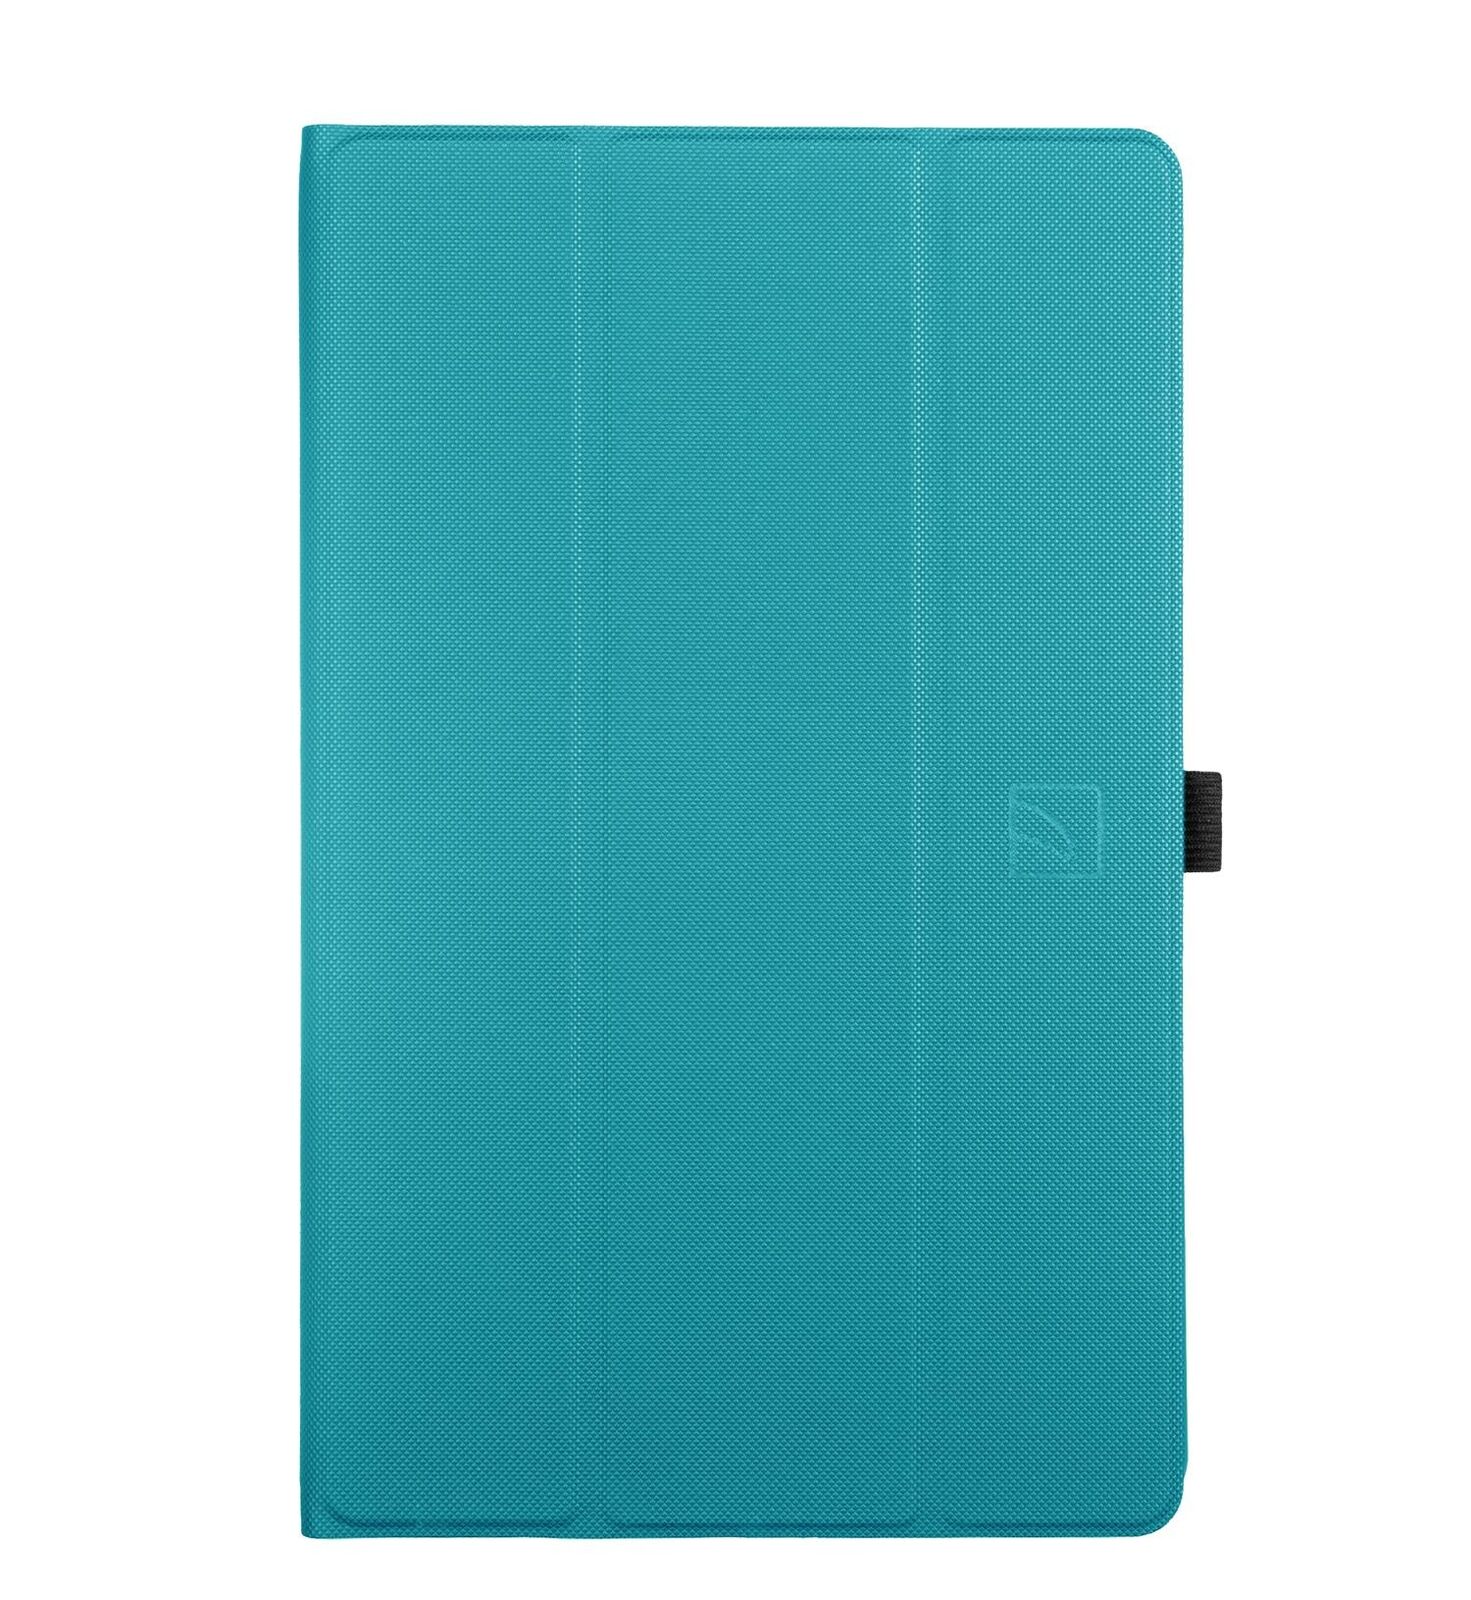 Tucano Gala Cover for Samsung Tab A 10.1 2019 T510 in Blue